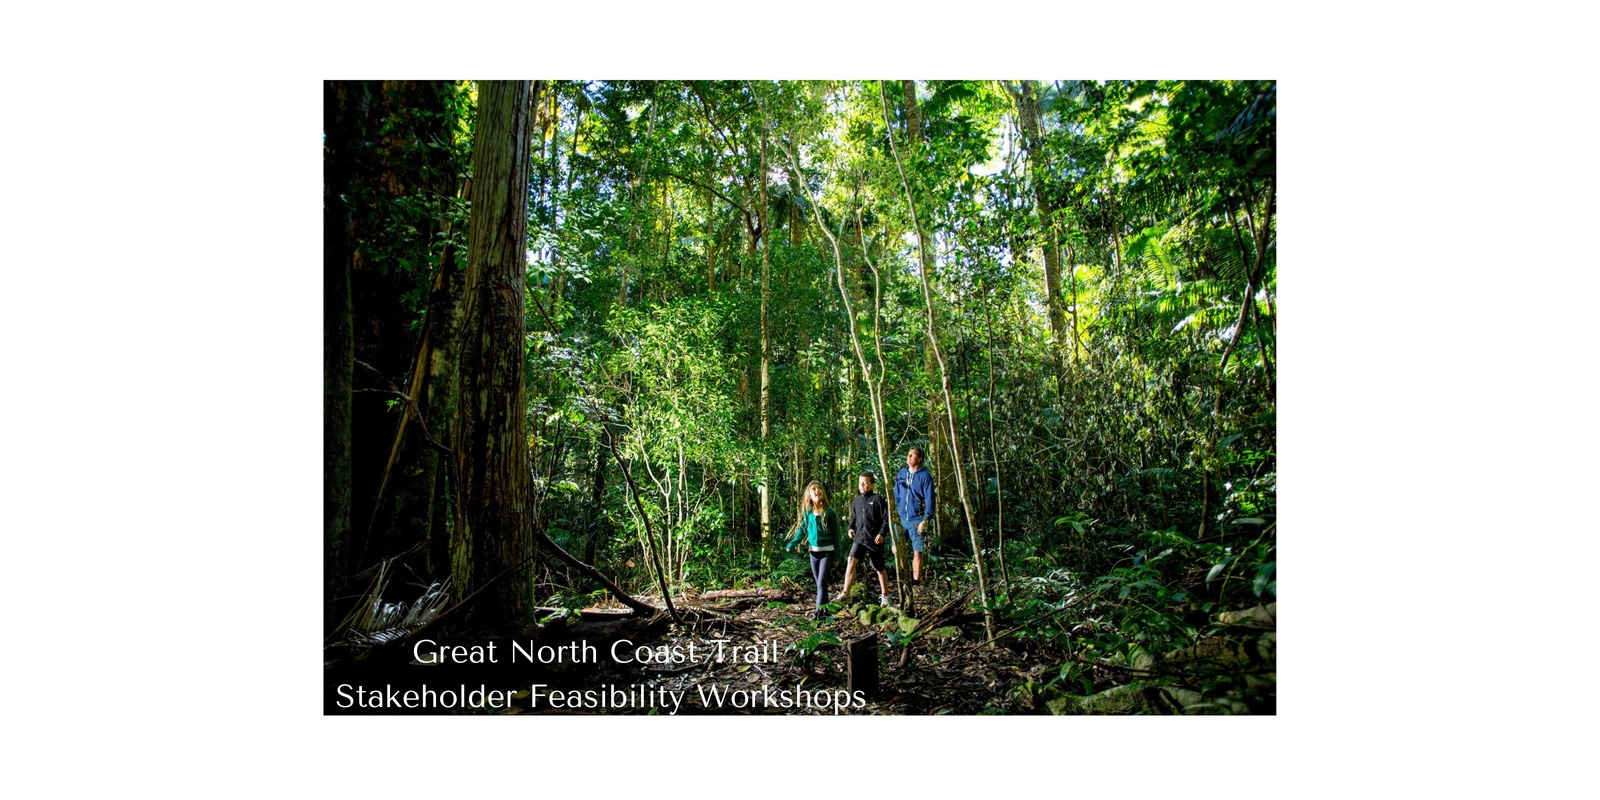 Great North Coast Trail - Stakeholder Feasibility Workshops